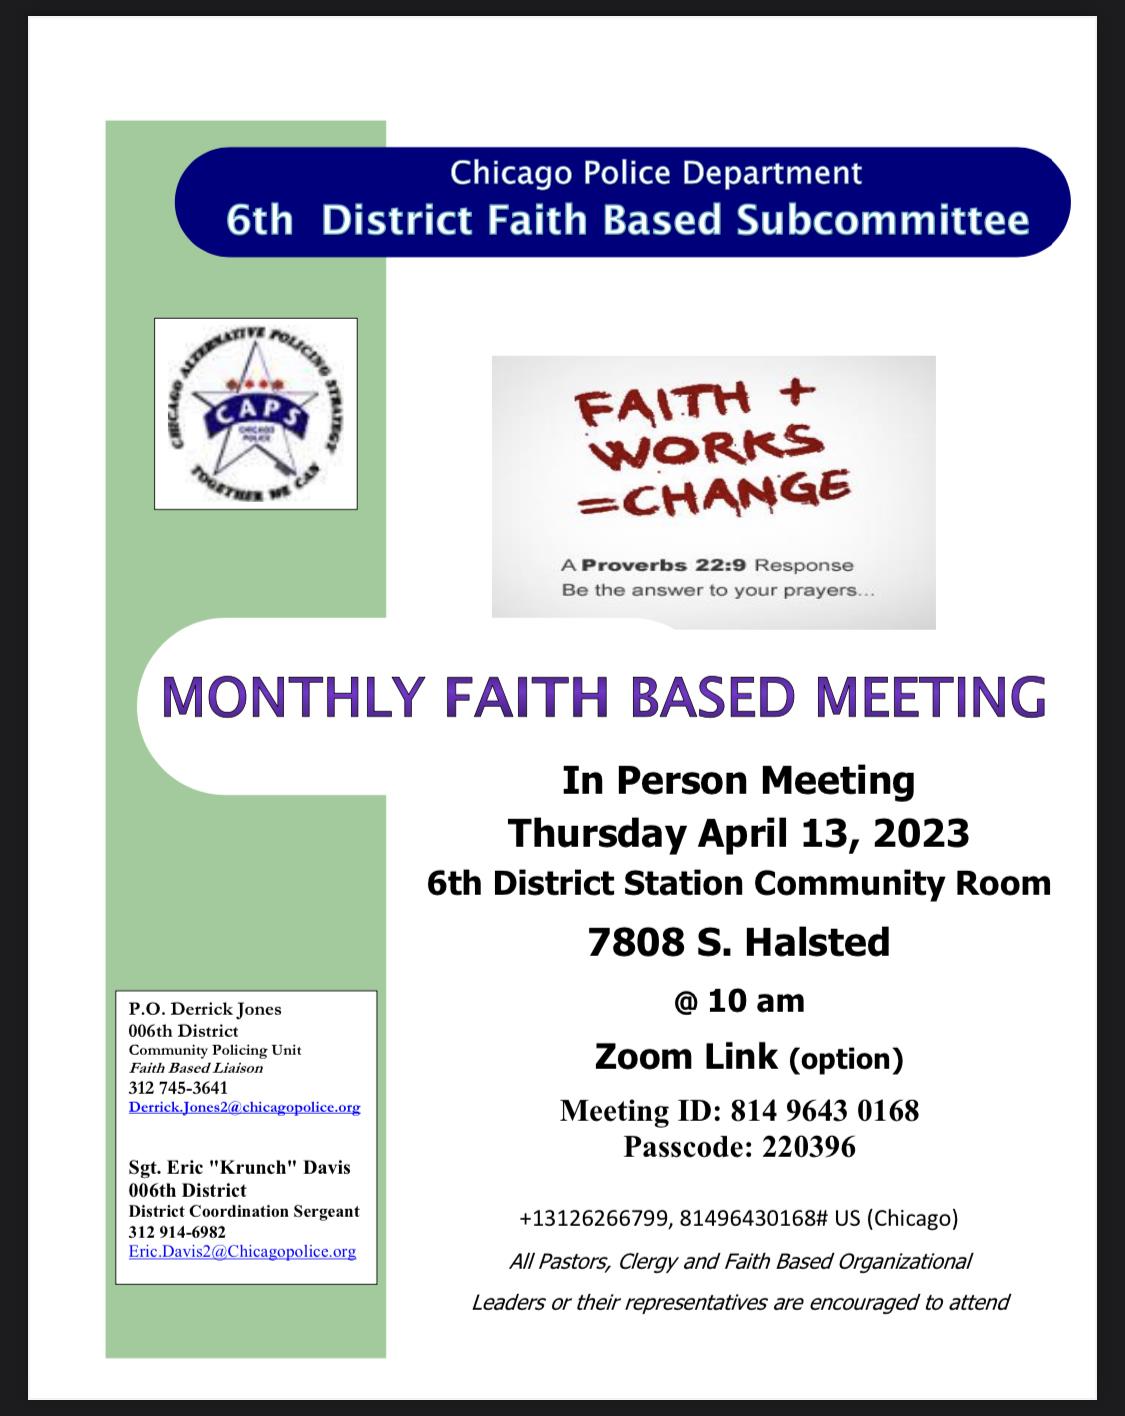 6th District Faith Based Subcommittee